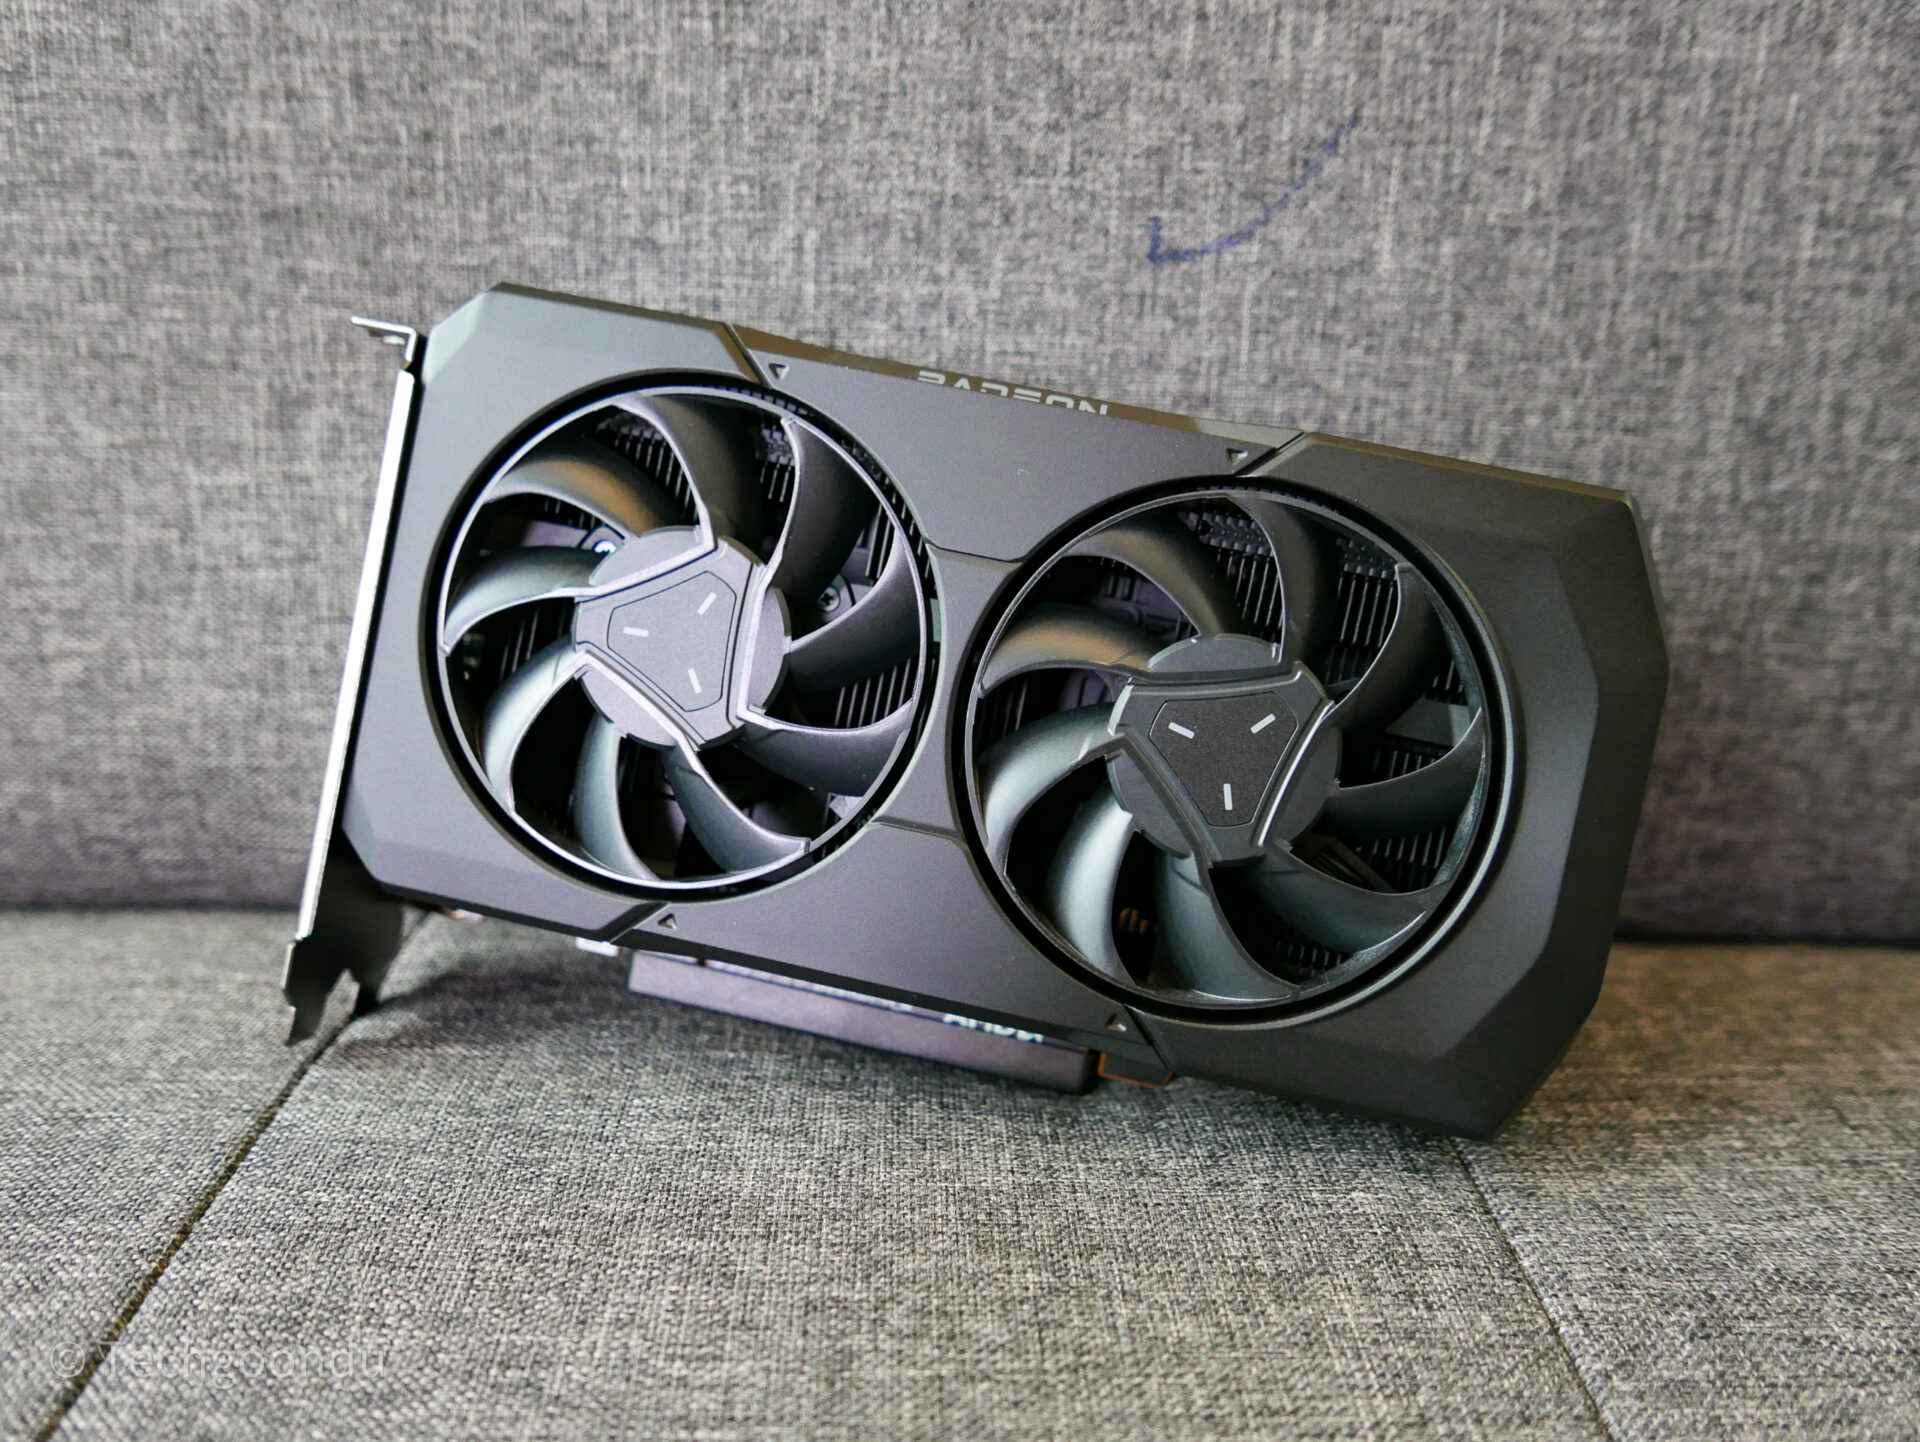 AMD Radeon RX 7600 8 GB (MBA) Review - A quiet and short GeForce